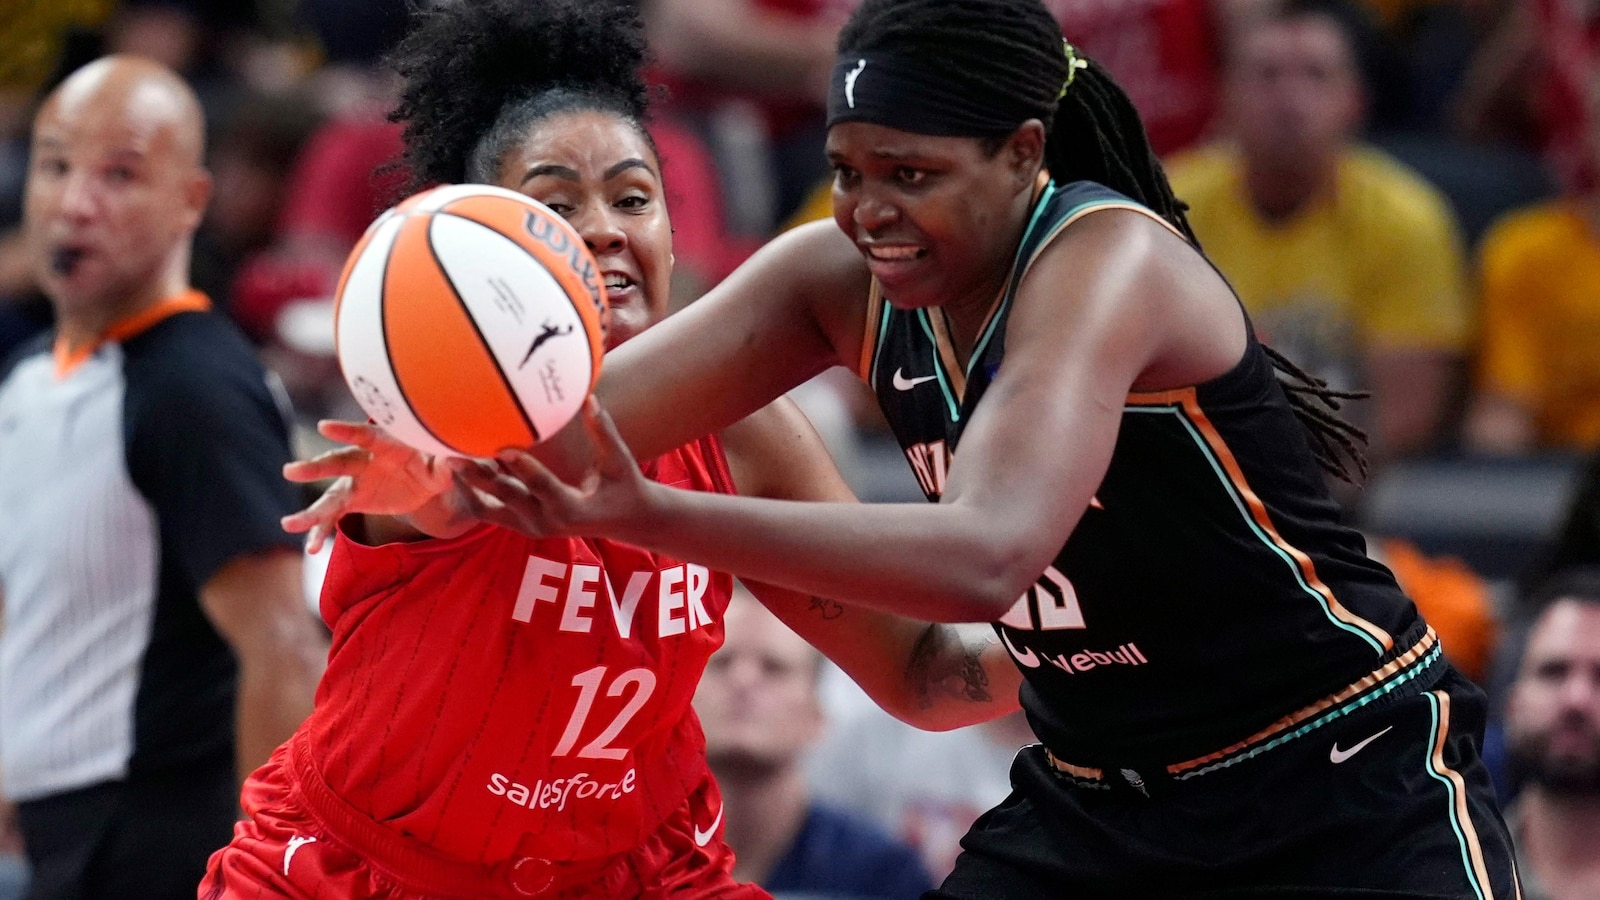 Caitlin Clark leads Fever to victory over Liberty with historic triple-double as WNBA rookie